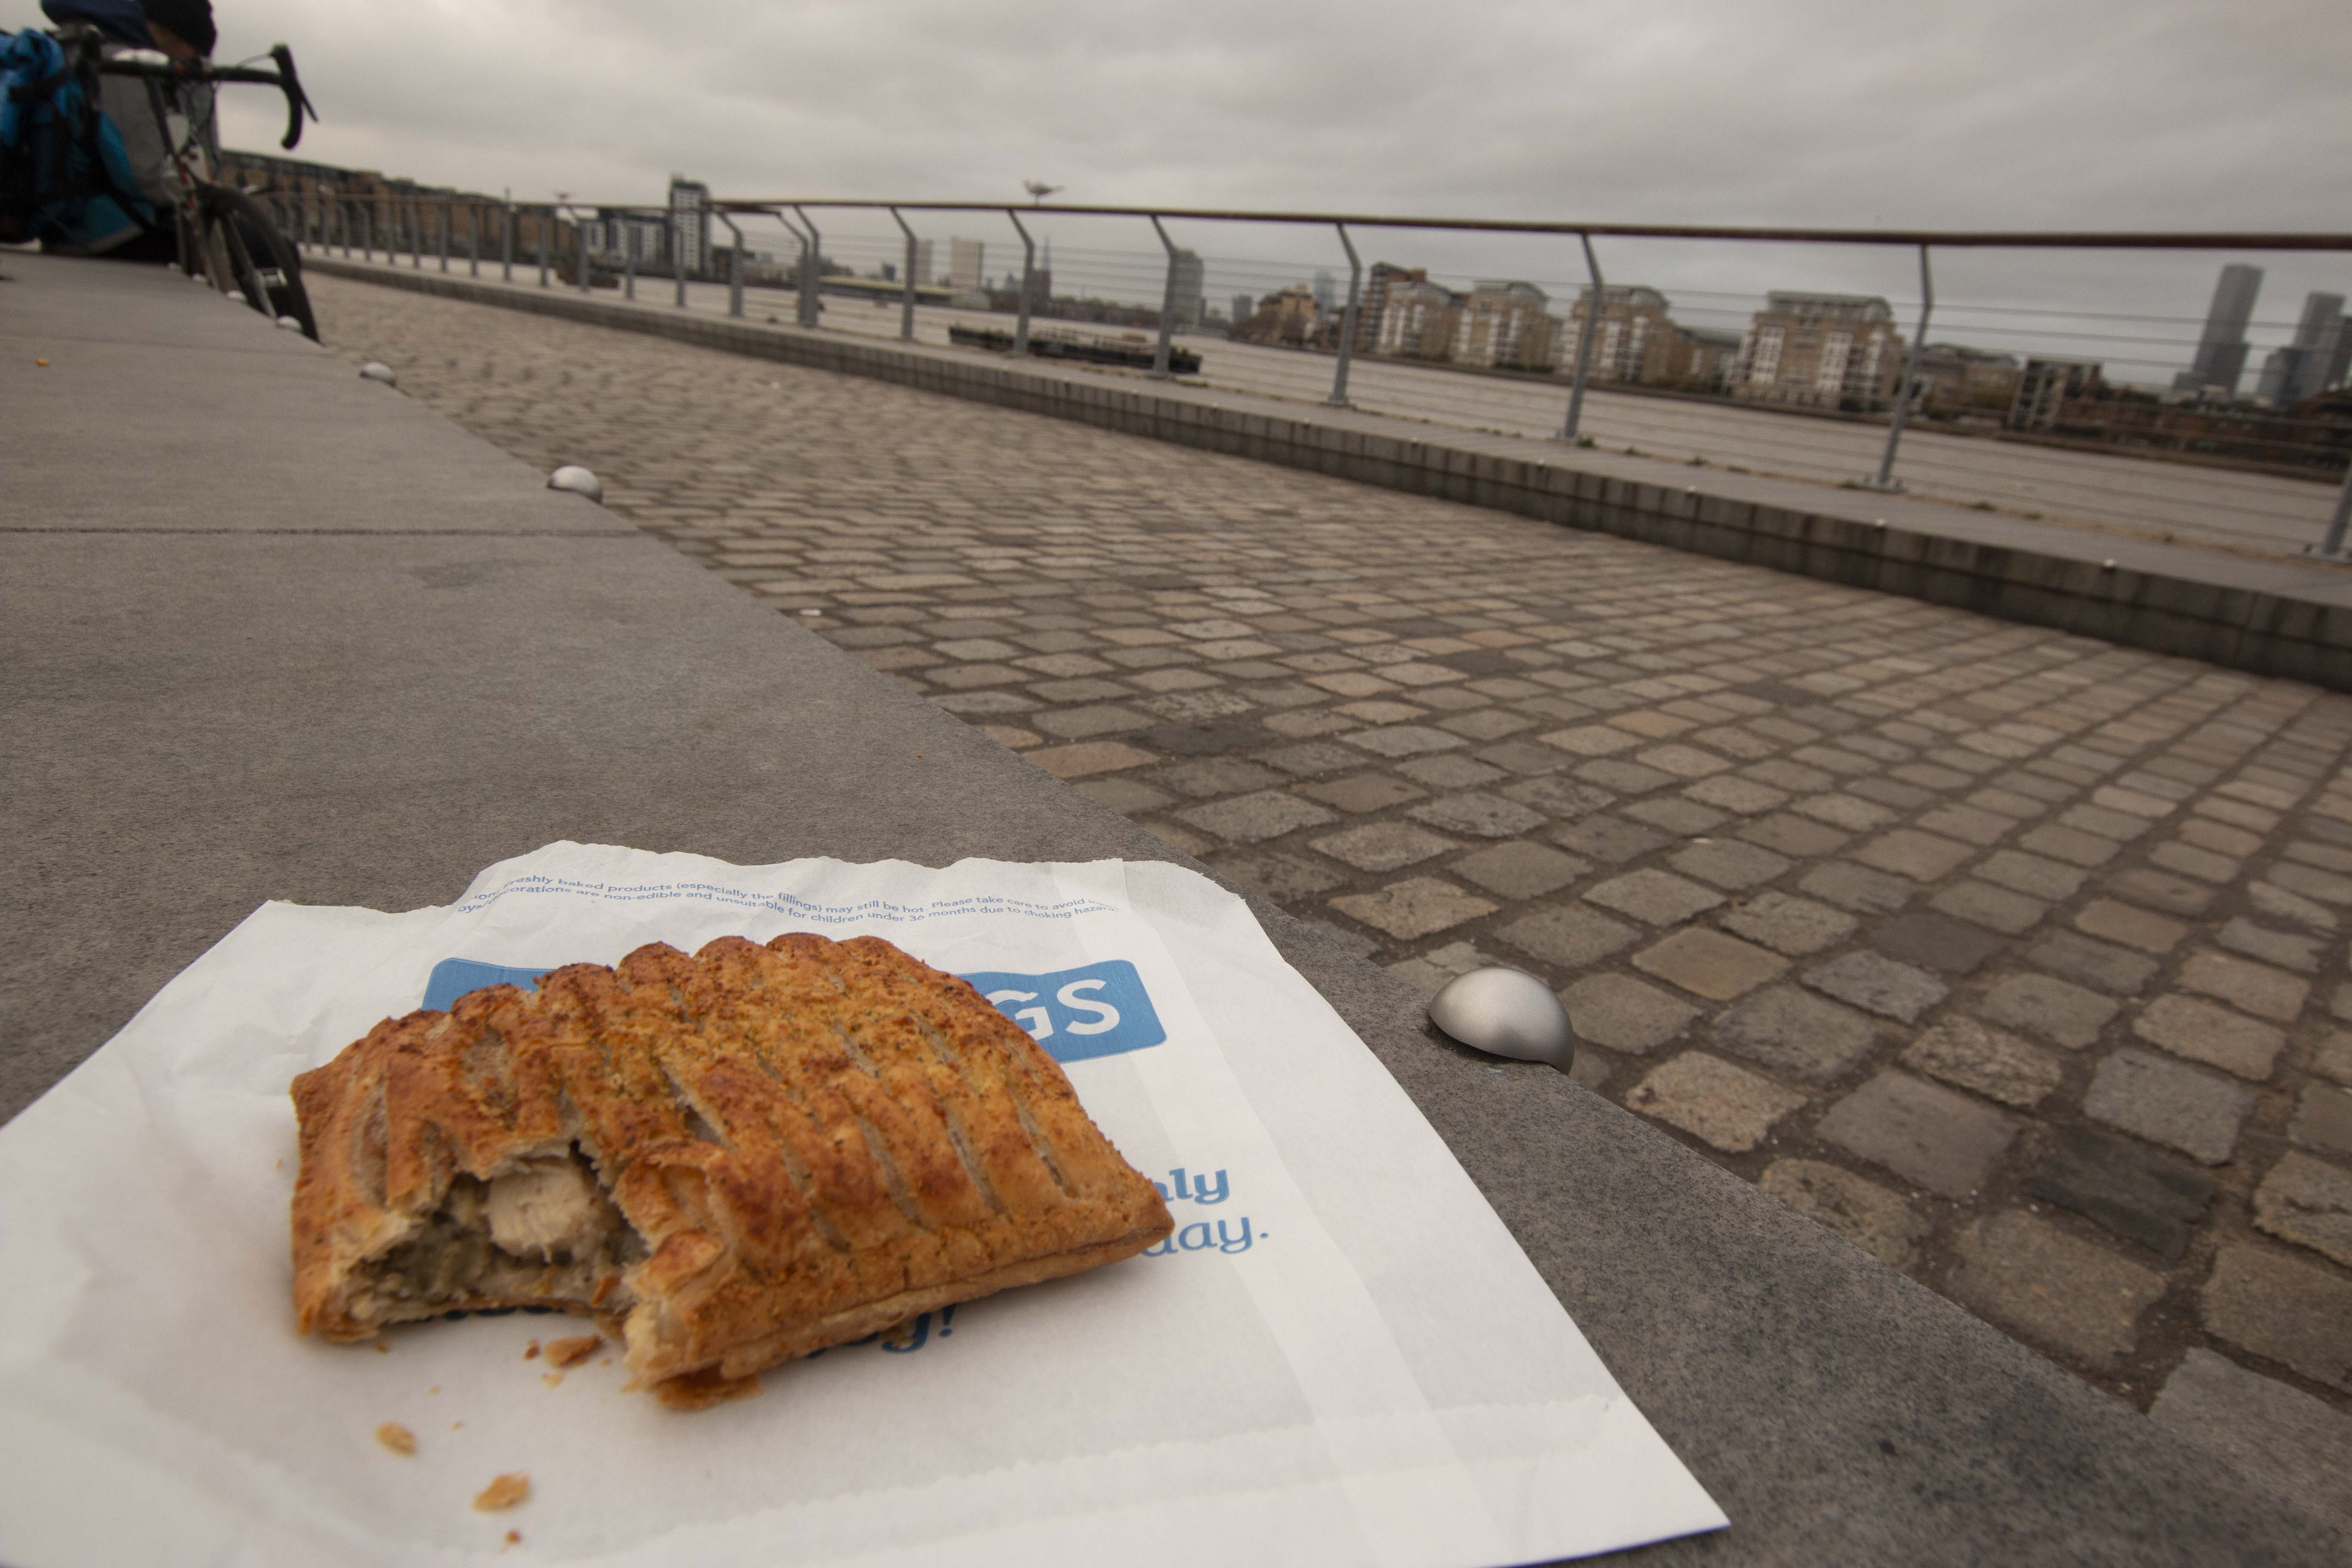 A Gregg's festive bake sat on the paper bag it came in. It is placed on a grey stone bench with the river Thames and an overcast sky in the background